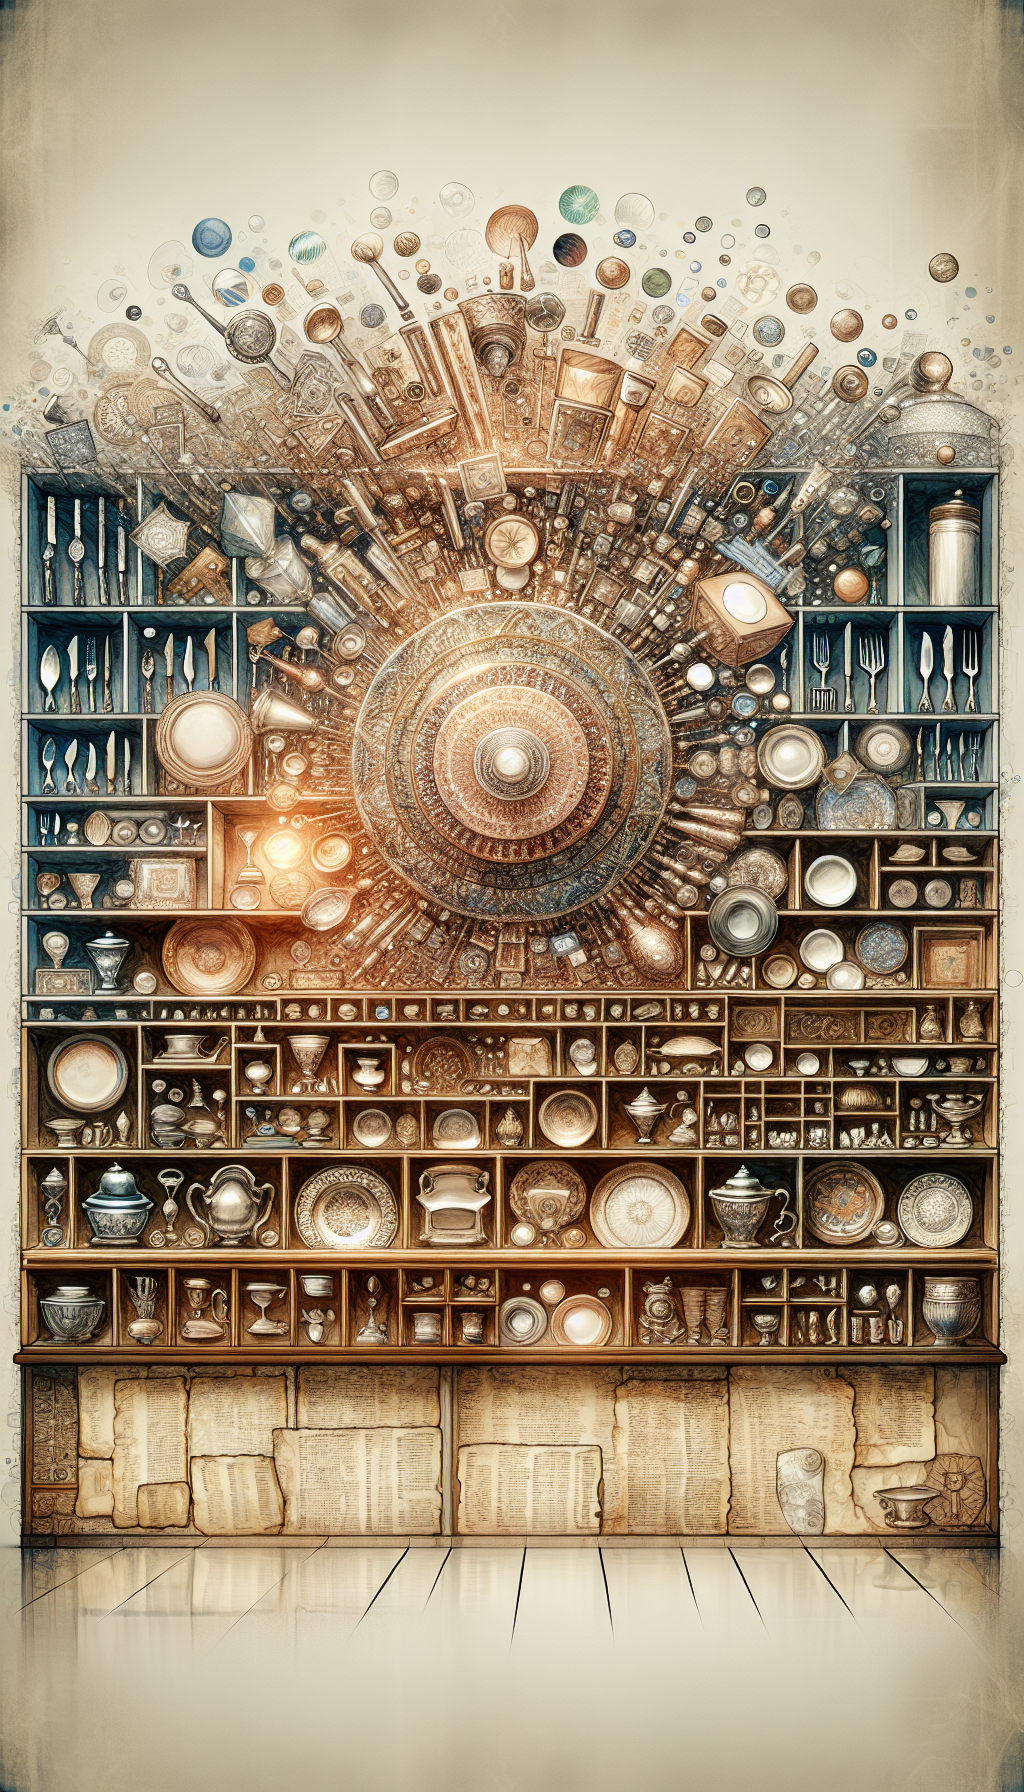 An opulent montage features a collector's cabinet with shelves divided into textures: the top glistens with silver cutlery cascading onto a fine porcelain plate mosaic, the middle showcases bronze and gold antique utensils, while the bottom spills a parchment list with aged ink detailing dish values, all rendered in a harmonious blend of watercolor, pen, and digital overlays.